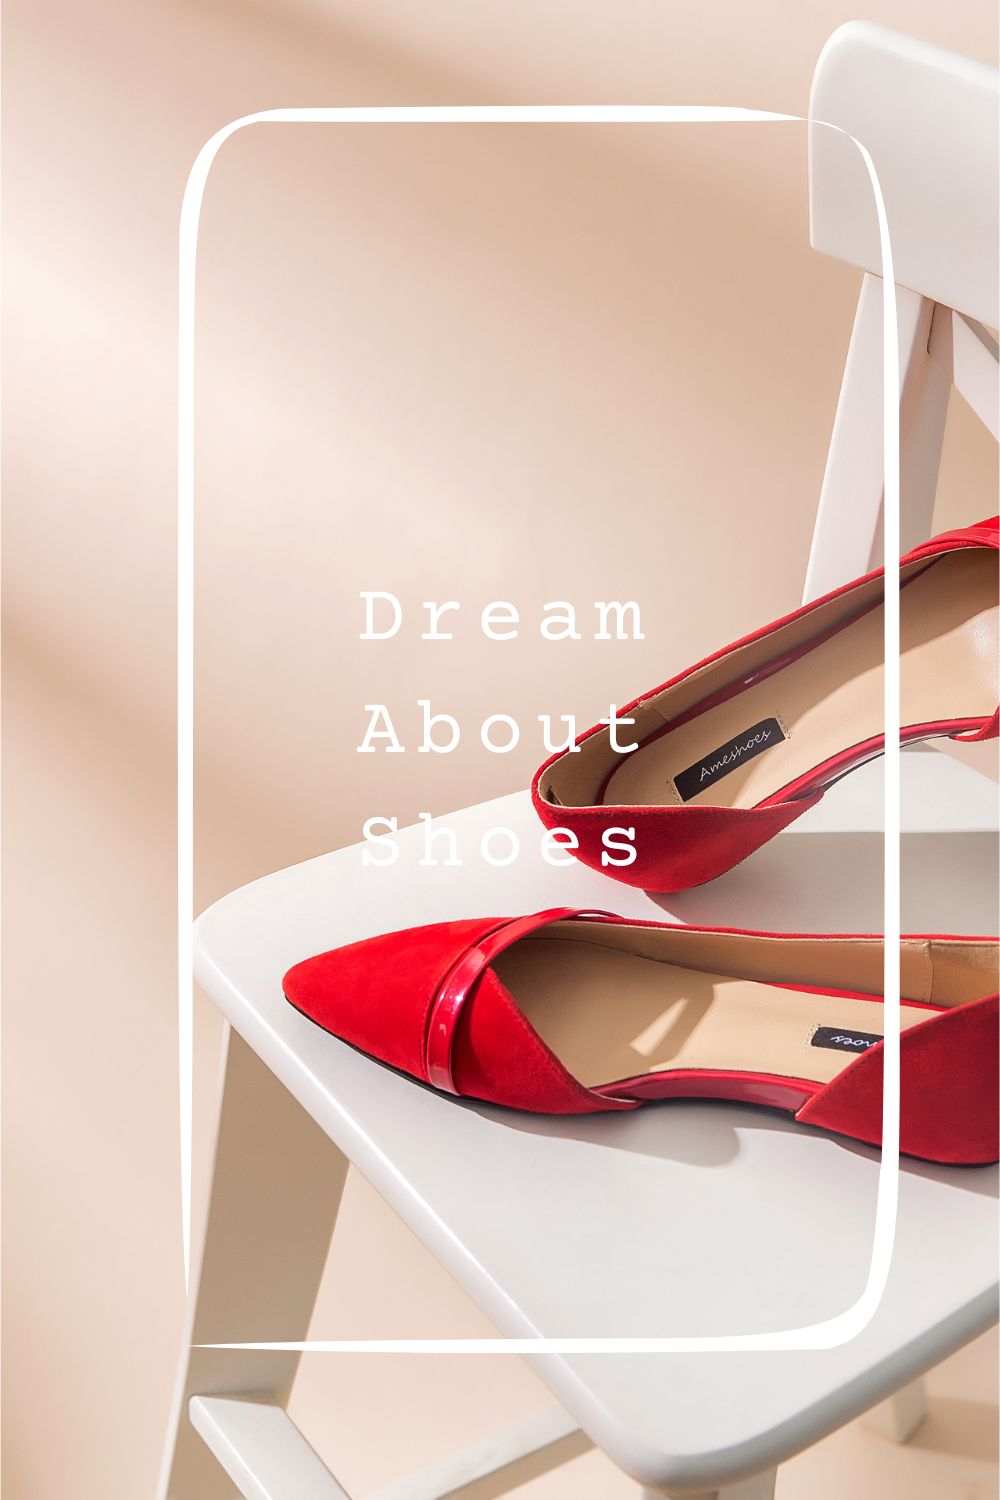 10 Dream About Shoes Meanings pin 1